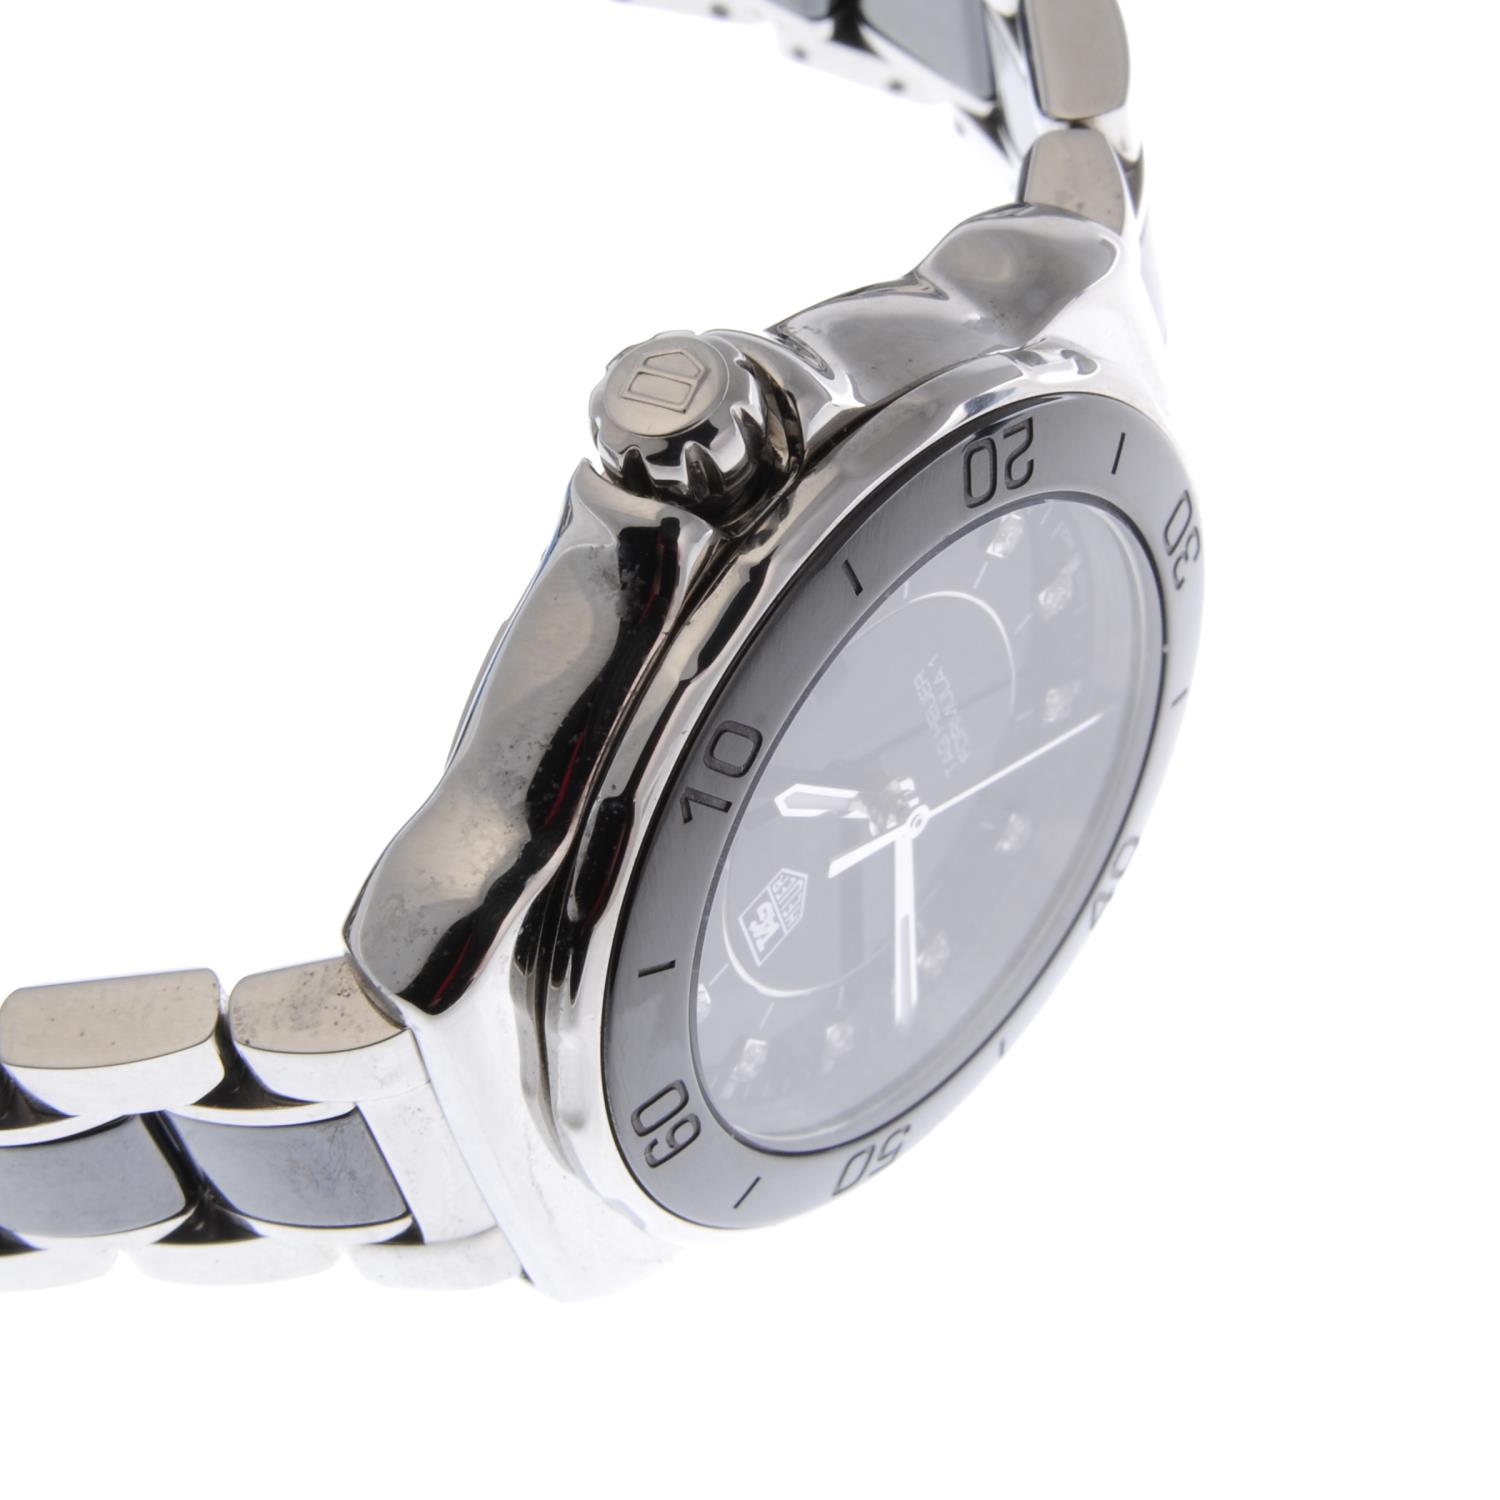 TAG HEUER - a lady's Formula 1 bracelet watch. Stainless steel case with ceramic calibrated bezel. - Image 4 of 7